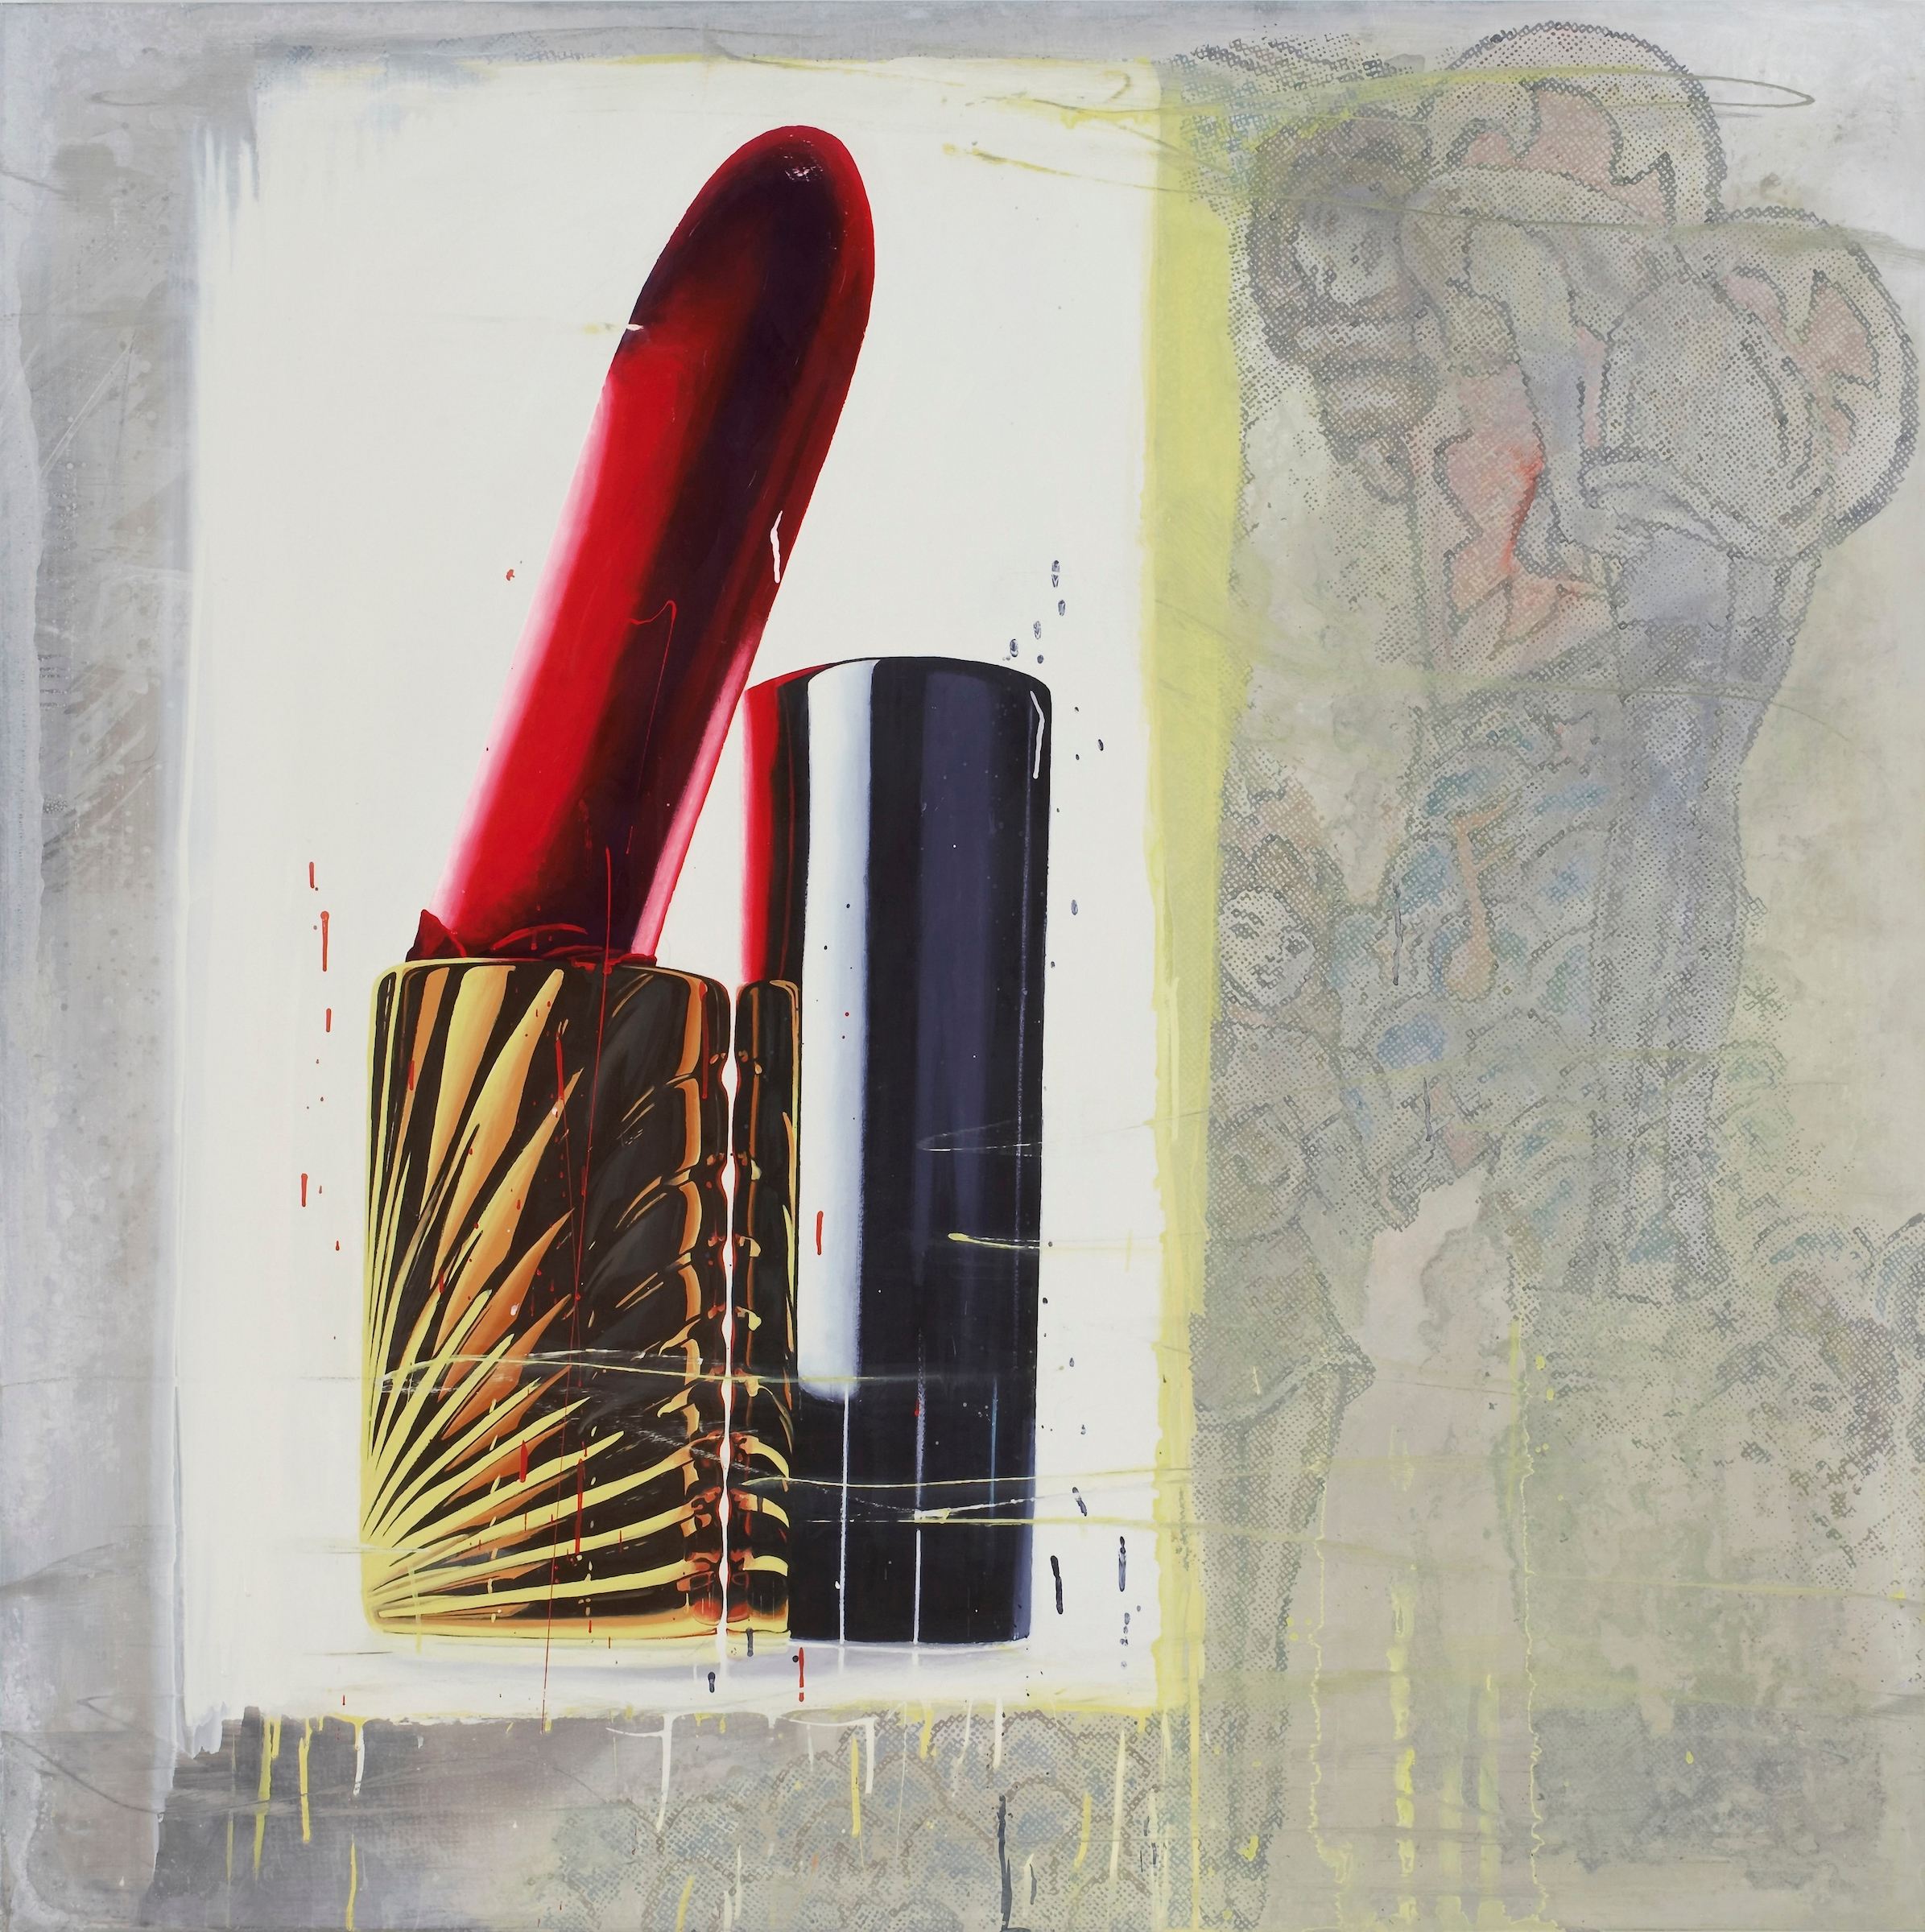 An enamel on metal artwork of a broken red lipstick and its tube by Marilyn Minter entitled Rouge Baiser dated 1994.